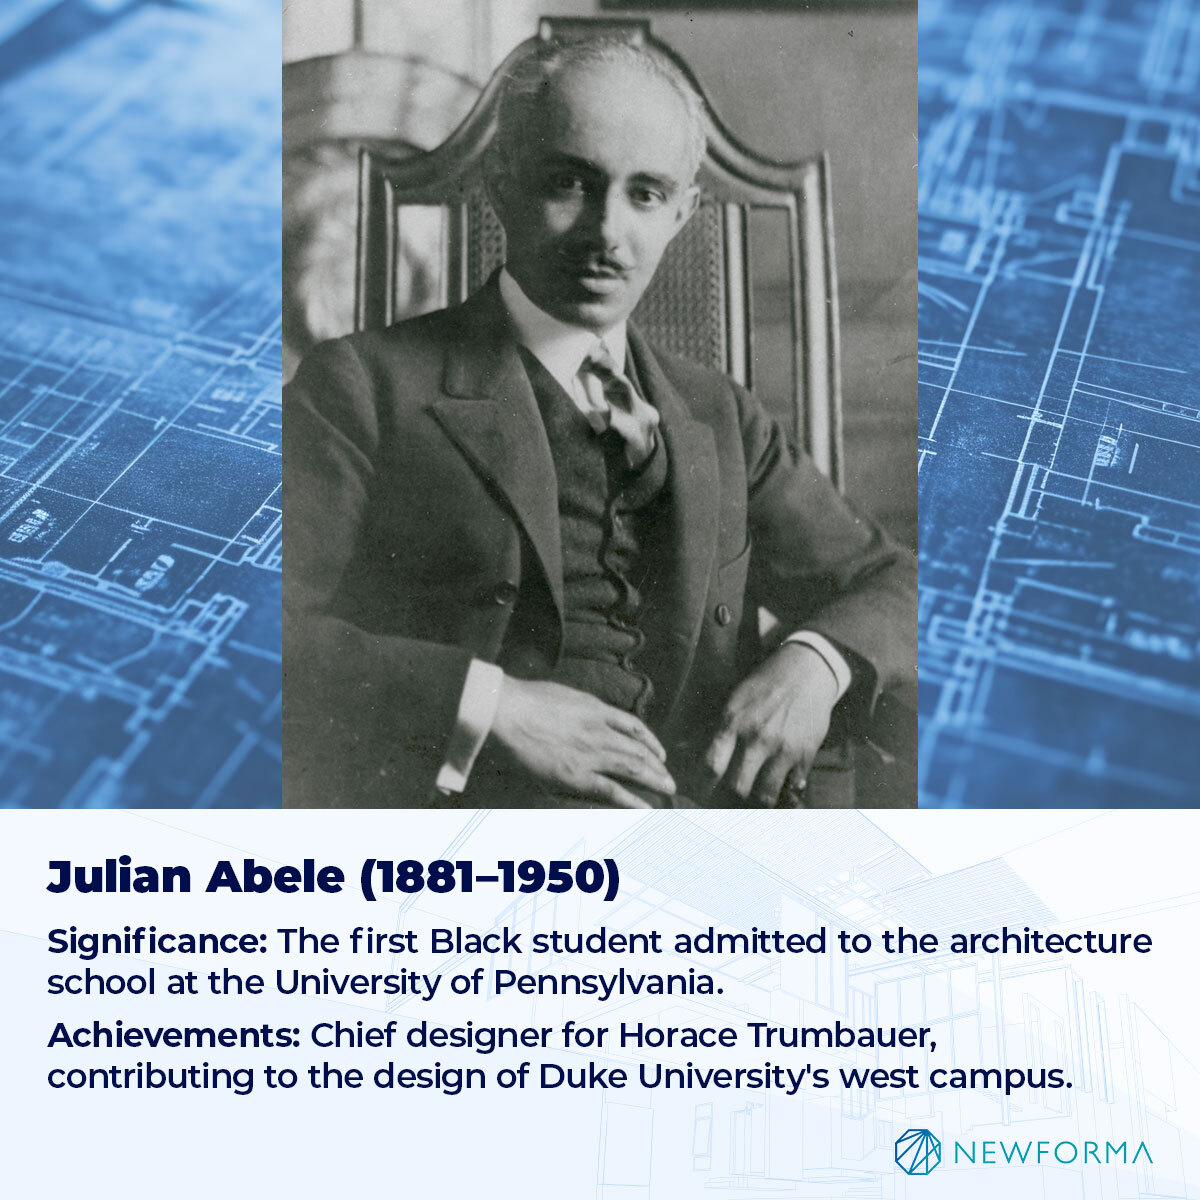 SIGNIFICANCE: THE FIRST BLACK STUDENT ADMITTED TO THE ARCHITECTURE SCHOOL AT THE UNIVERSITY OF PENNSYLVANIA. 
ACHIEVEMENTS: CHIEF DESIGNER FOR HORACE TRUMBAUER, CONTRIBUTING TO THE DESIGN OF DUKE UNIVERSITY'S WEST CAMPUS. 
